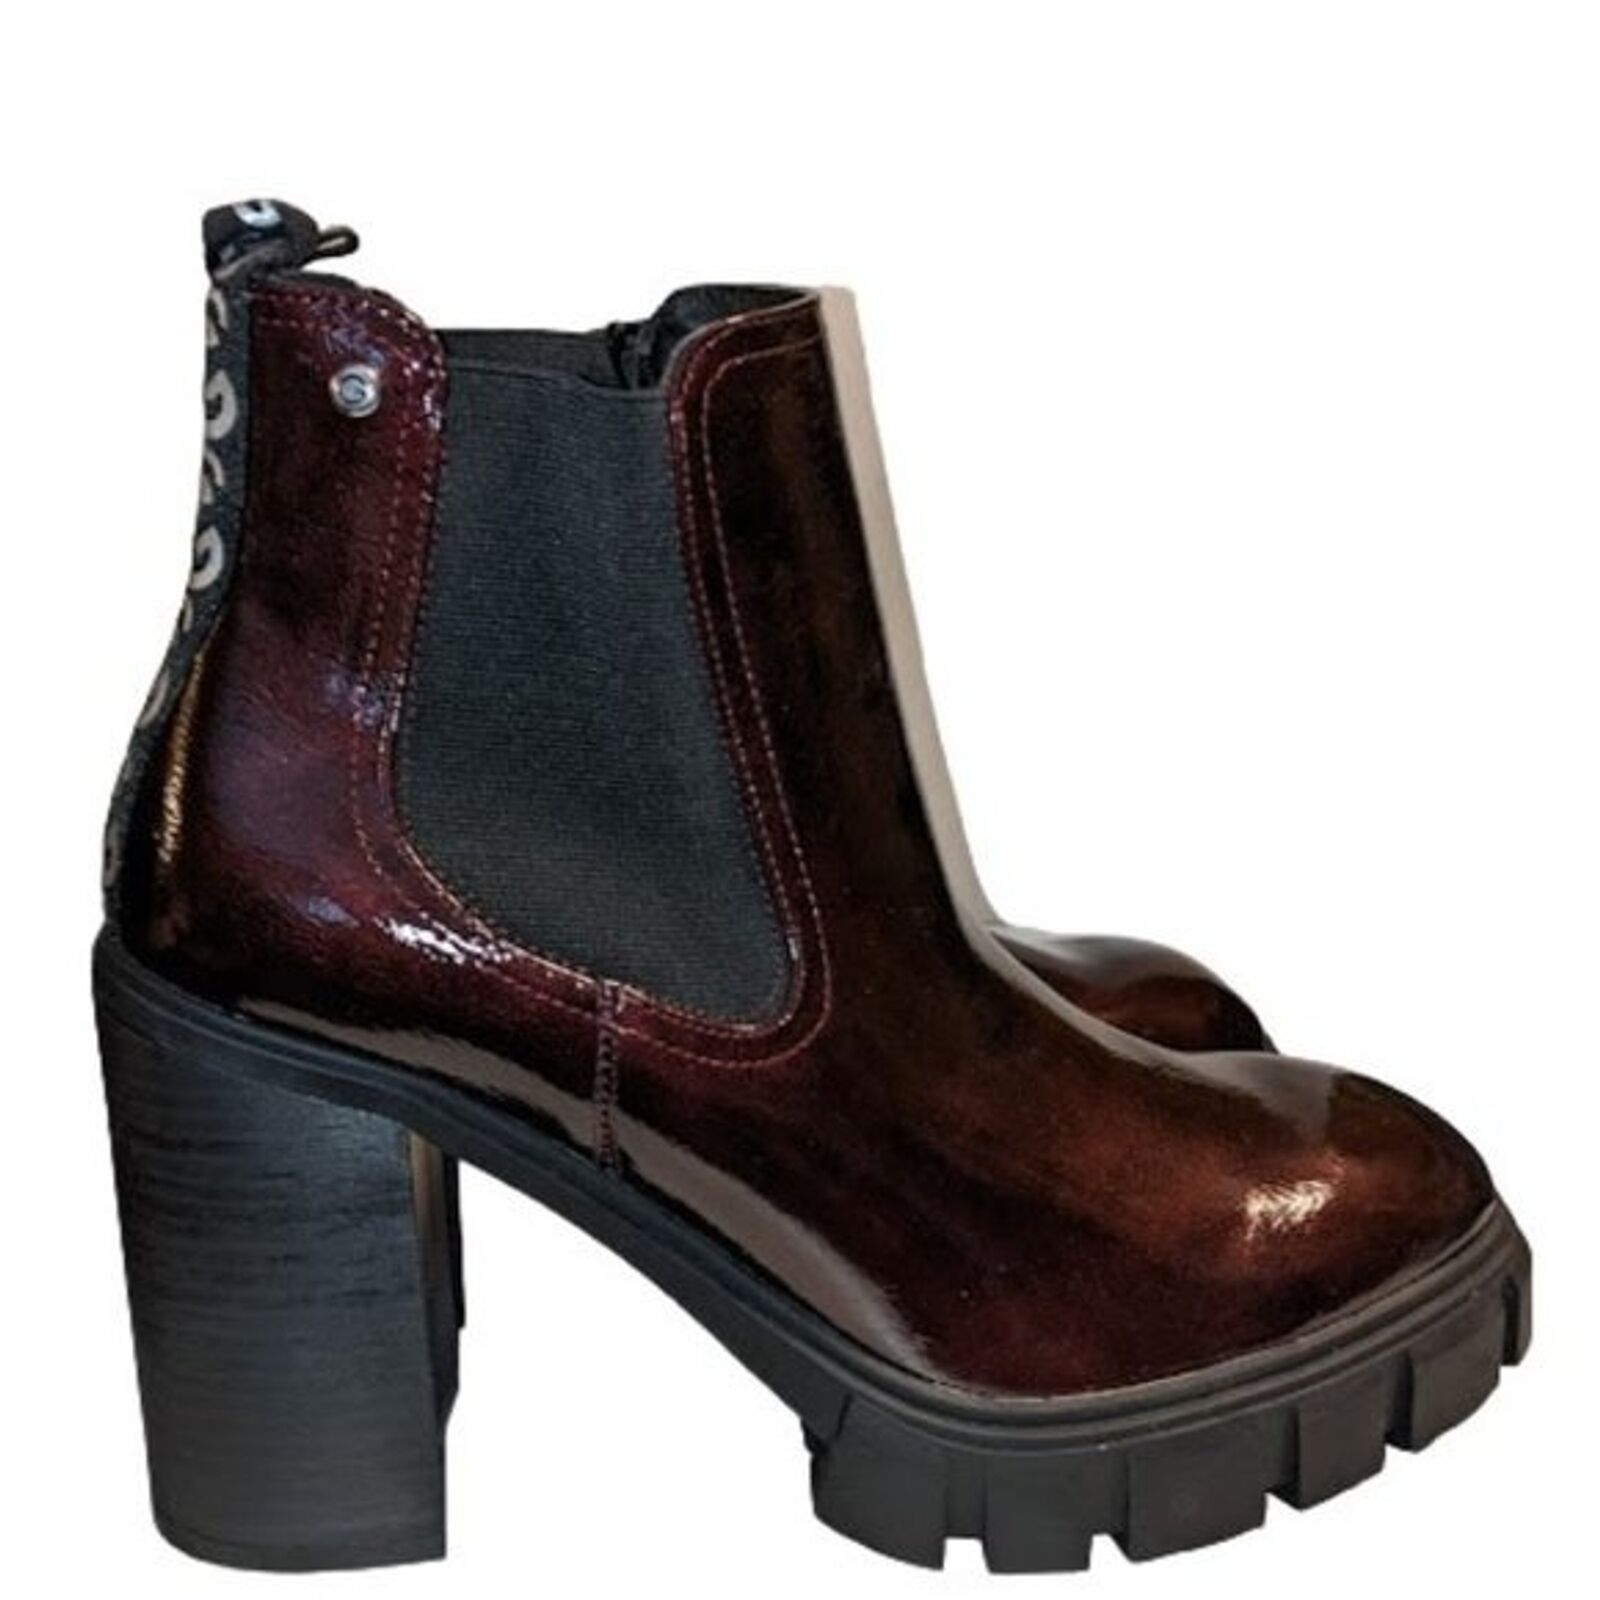 G BY Guess Los Angeles Burgundy Glossy Finish Keona Boot Size 11M New w/out Box